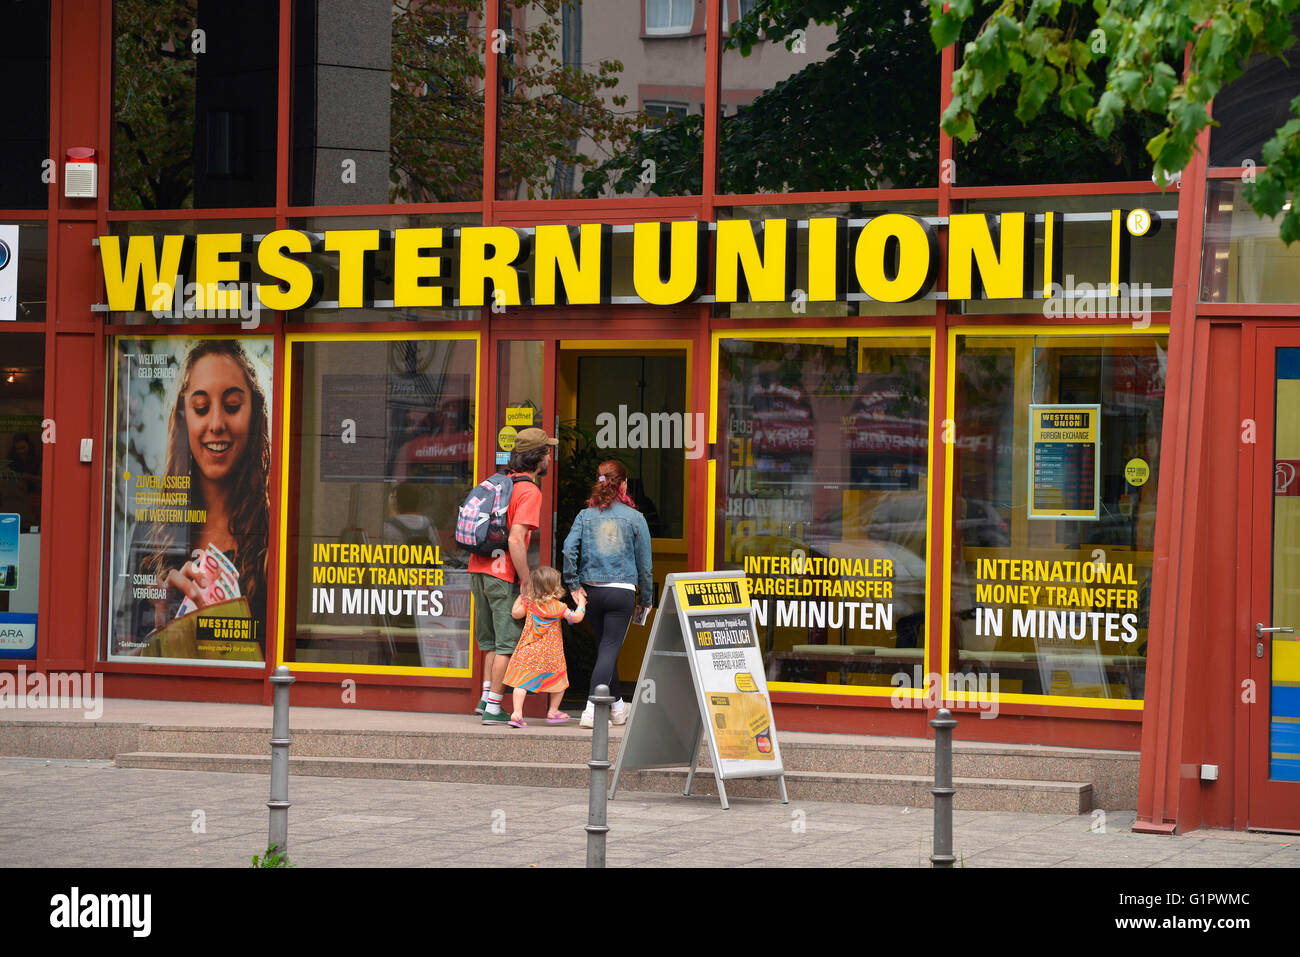 Western Union High Resolution Stock Photography and Images - Alamy